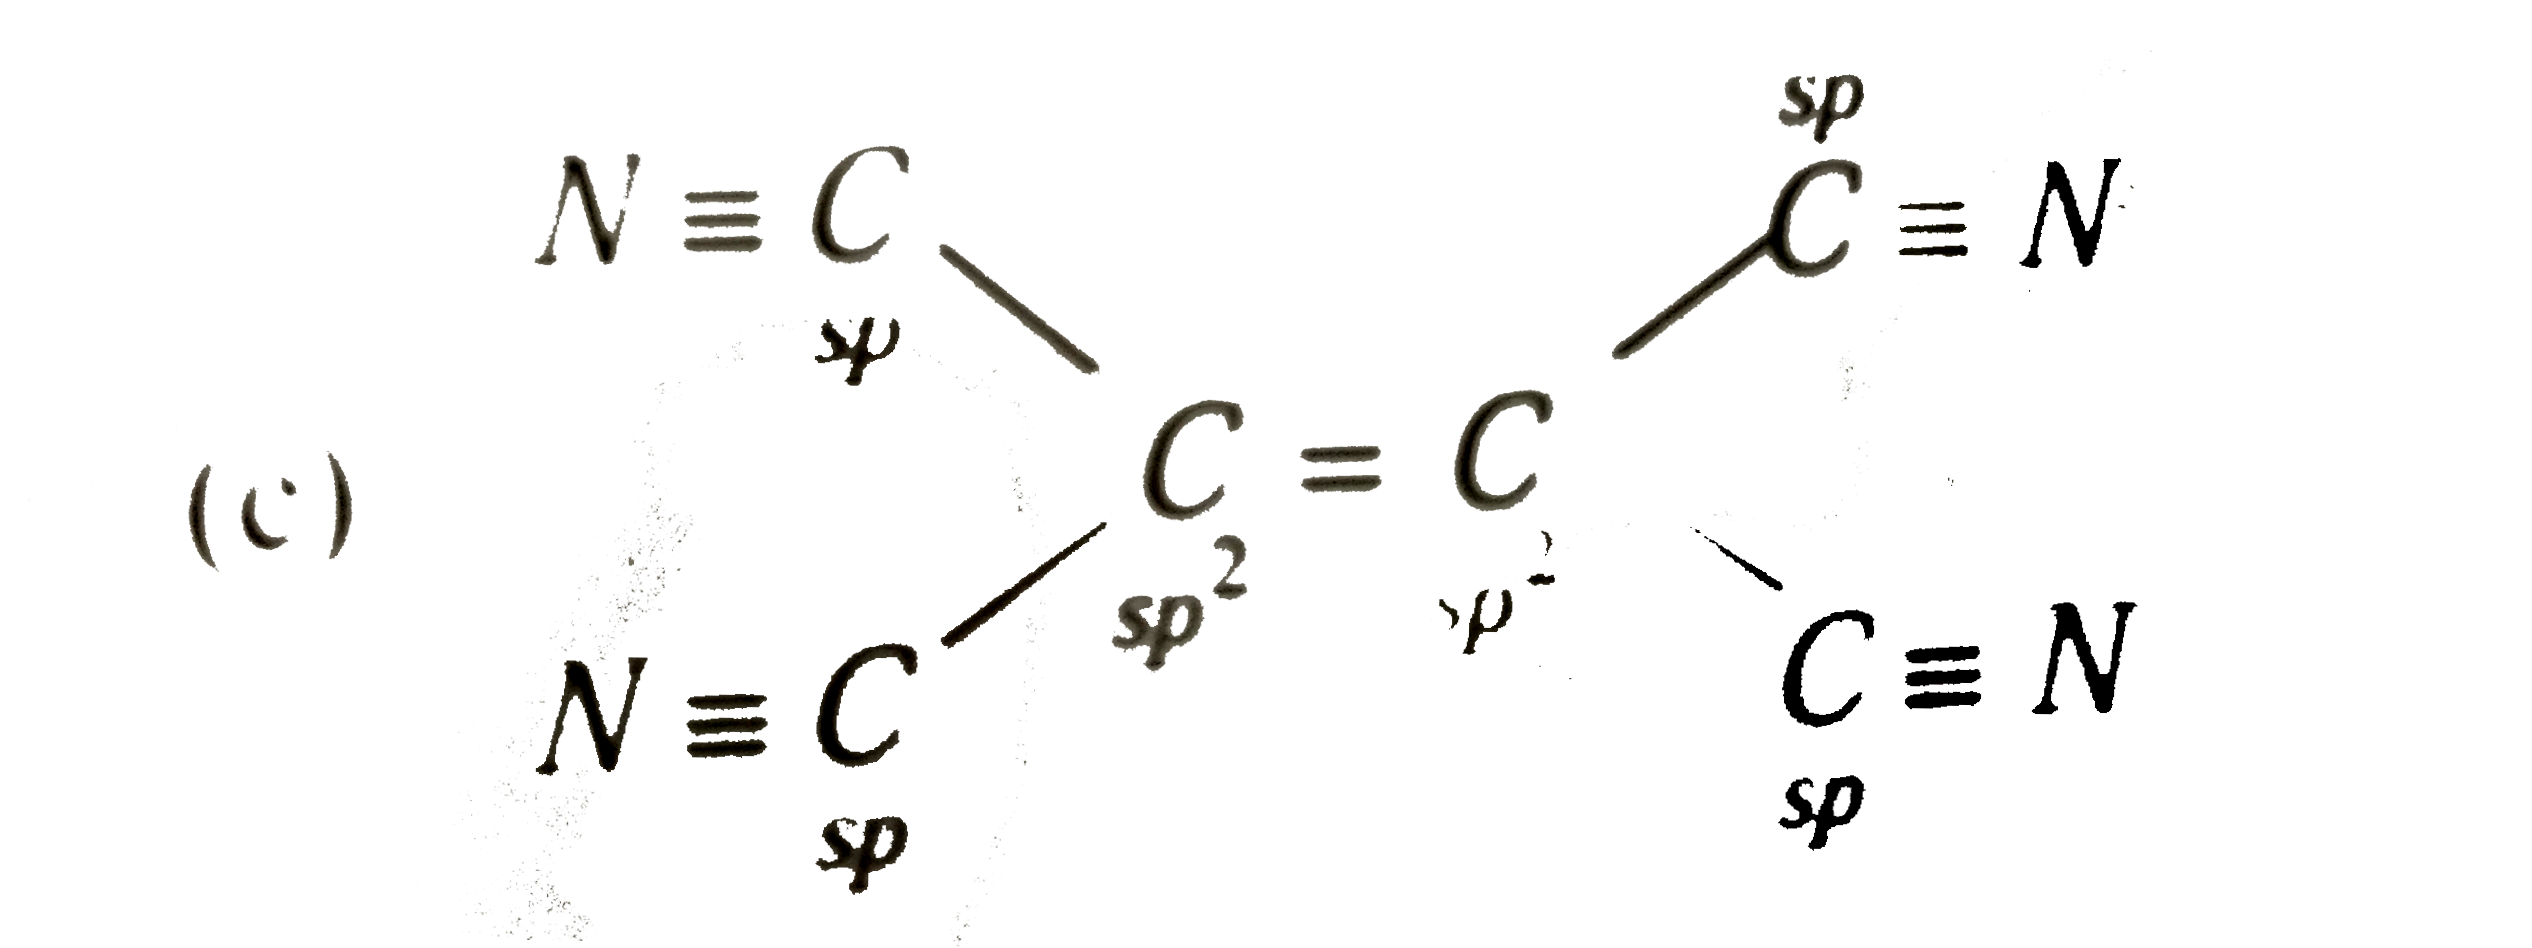 Carbon Atoms In The Compound Cn 4 C 2 Are